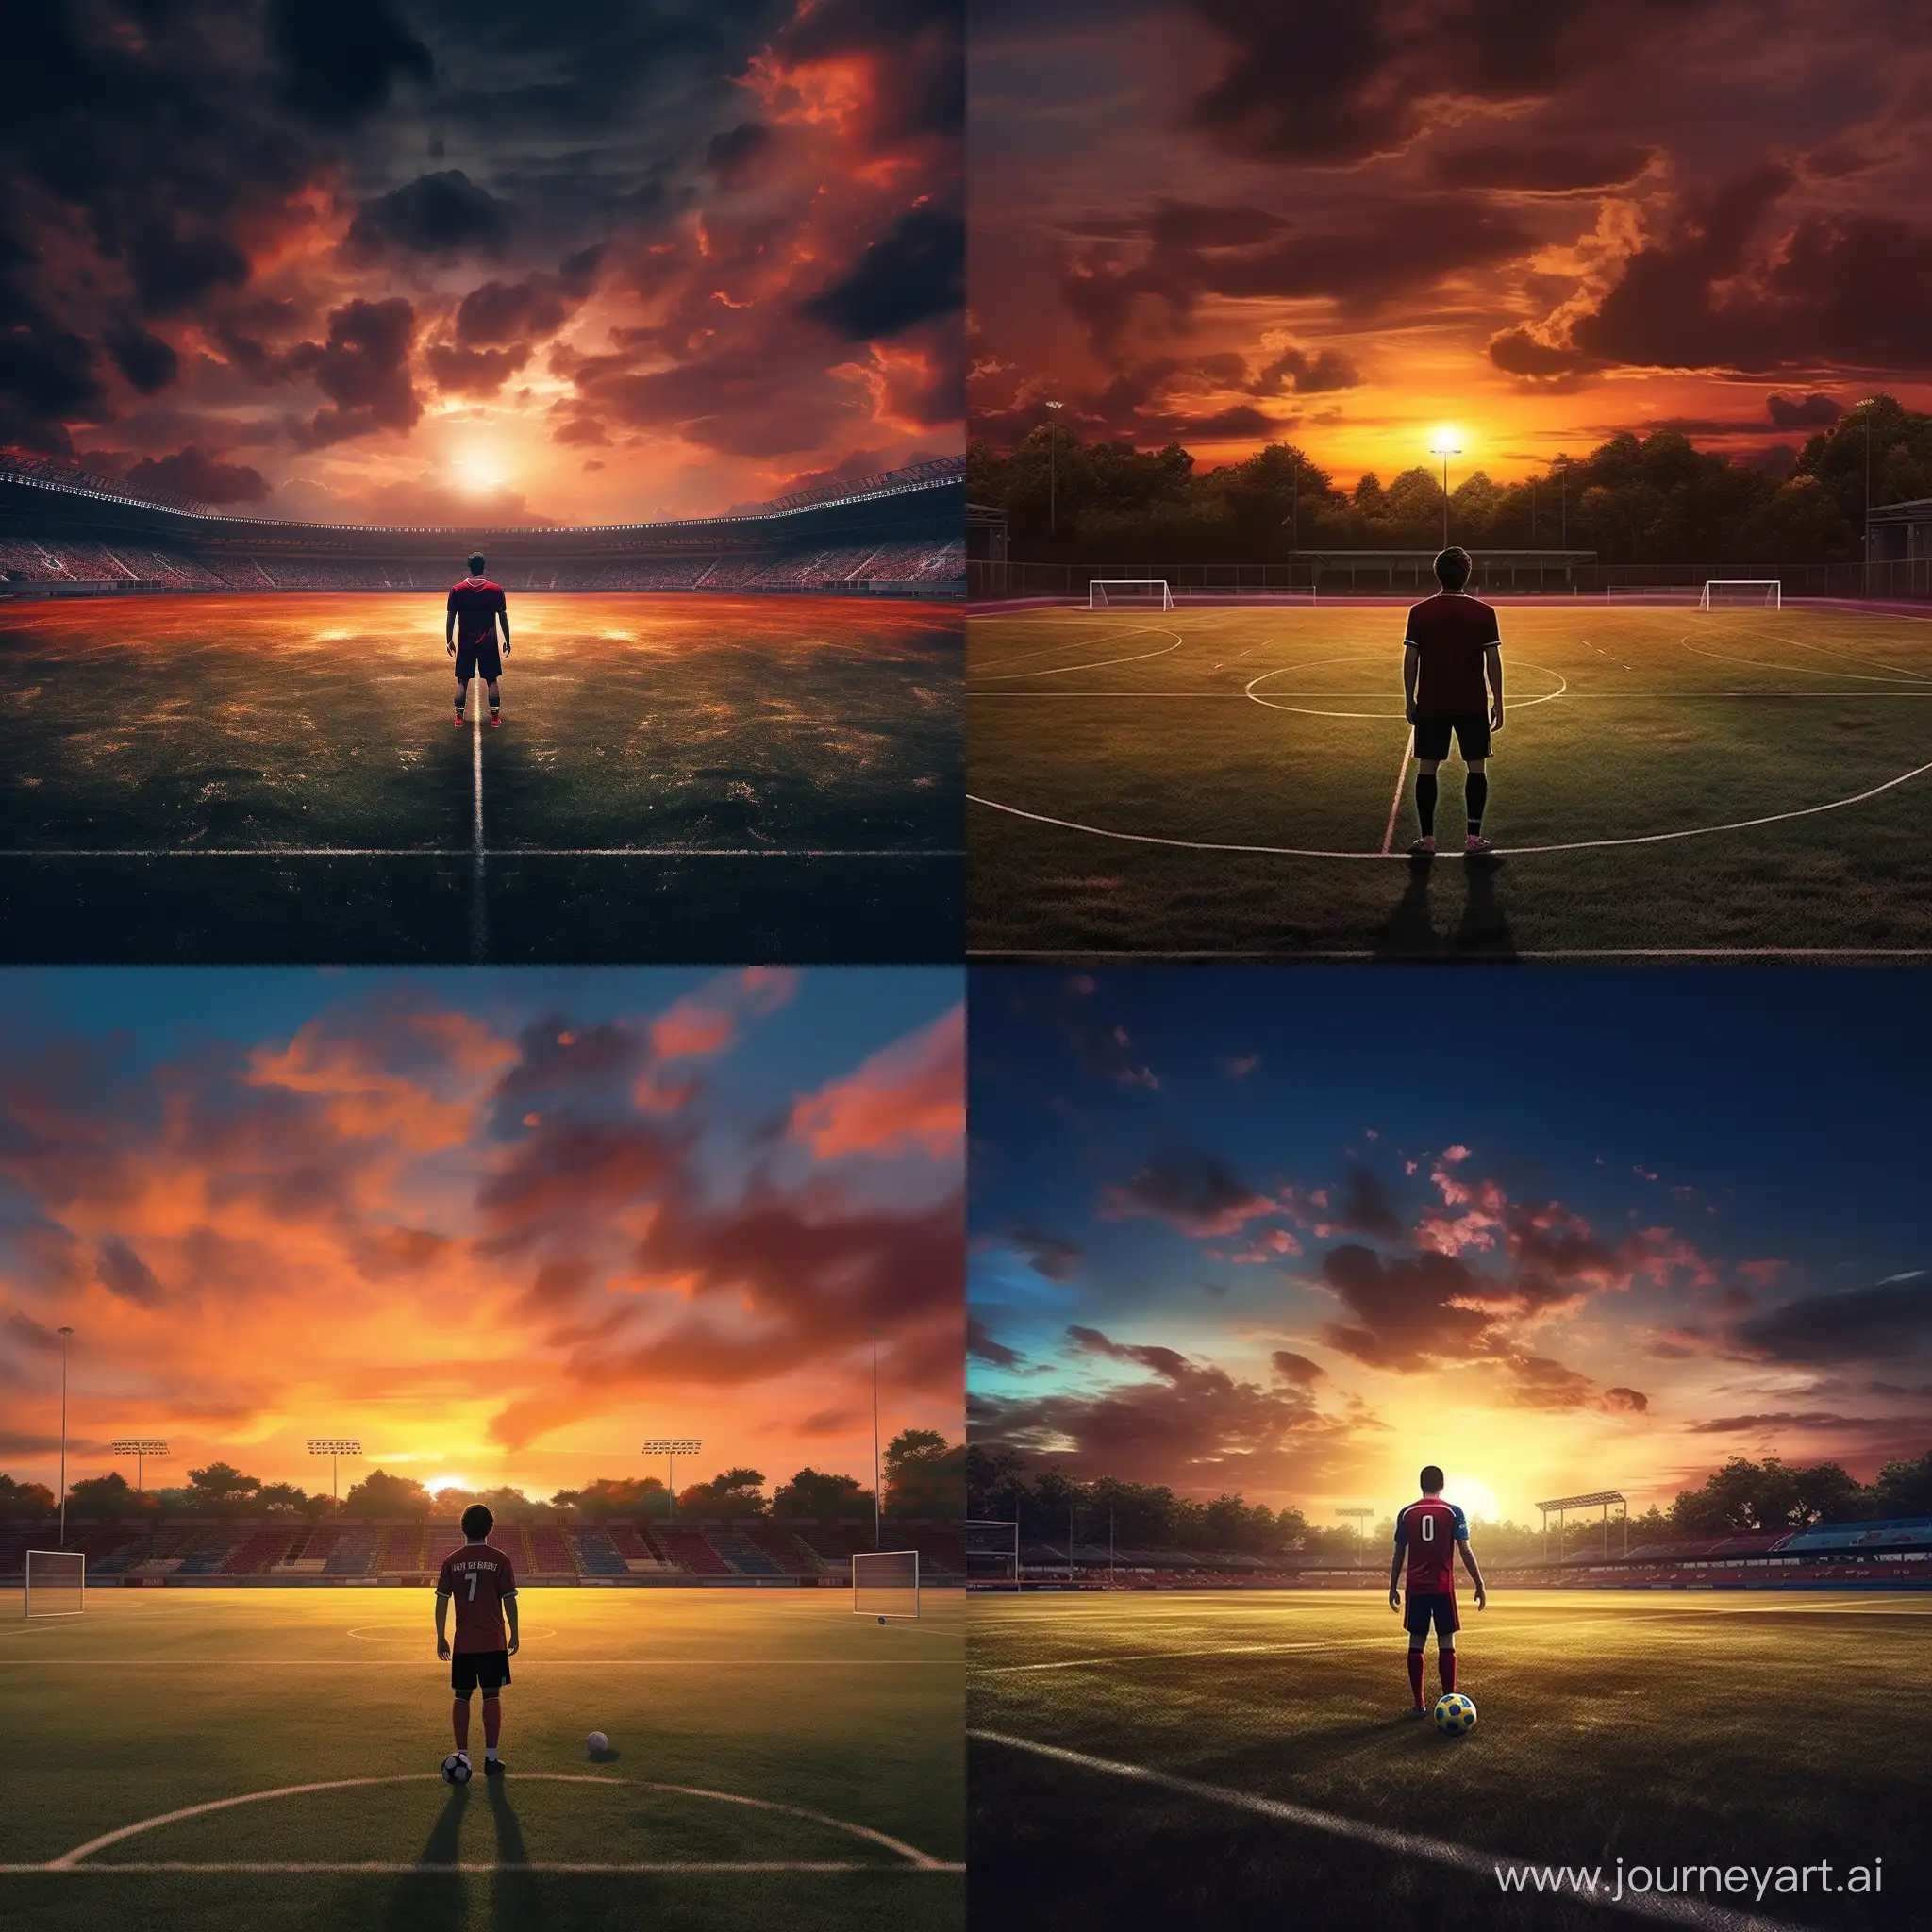 Lonely-Soccer-Player-in-Hyper-Photorealistic-Sunset-Scene